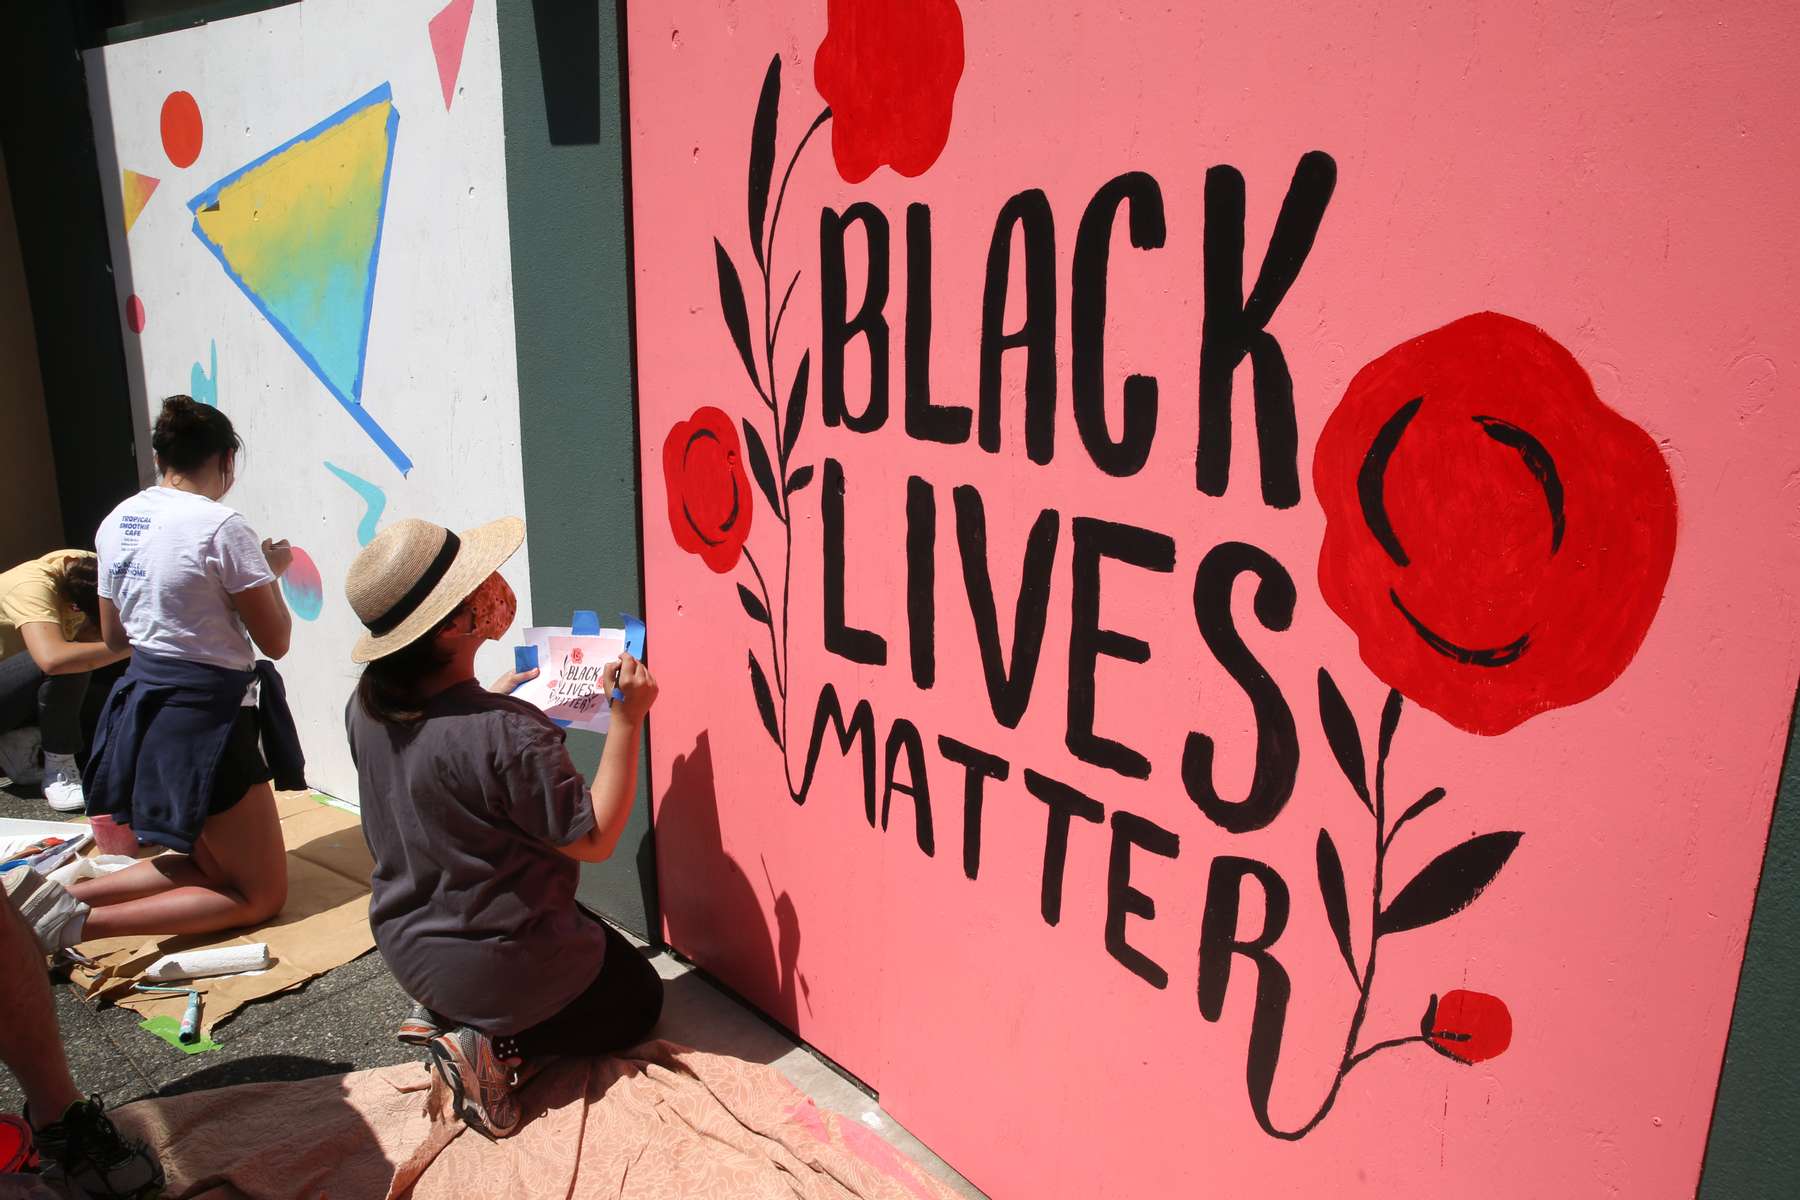 Misha Zadeh and Ben Graham (not in photo) paint a Black Lives Matter mural on the boarded up ICHS Vision Clinic in Seattleís Chinatown International District in Seattle Washington on June 14, 2020. Says Zadeh, {quote}Its really cool to see the arts community come together and put effort into such a good cause.{quote} Several community arts events were held to beautify the boarded up storefronts and support the Black Lives Matter movement. (Photo by Karen Ducey)